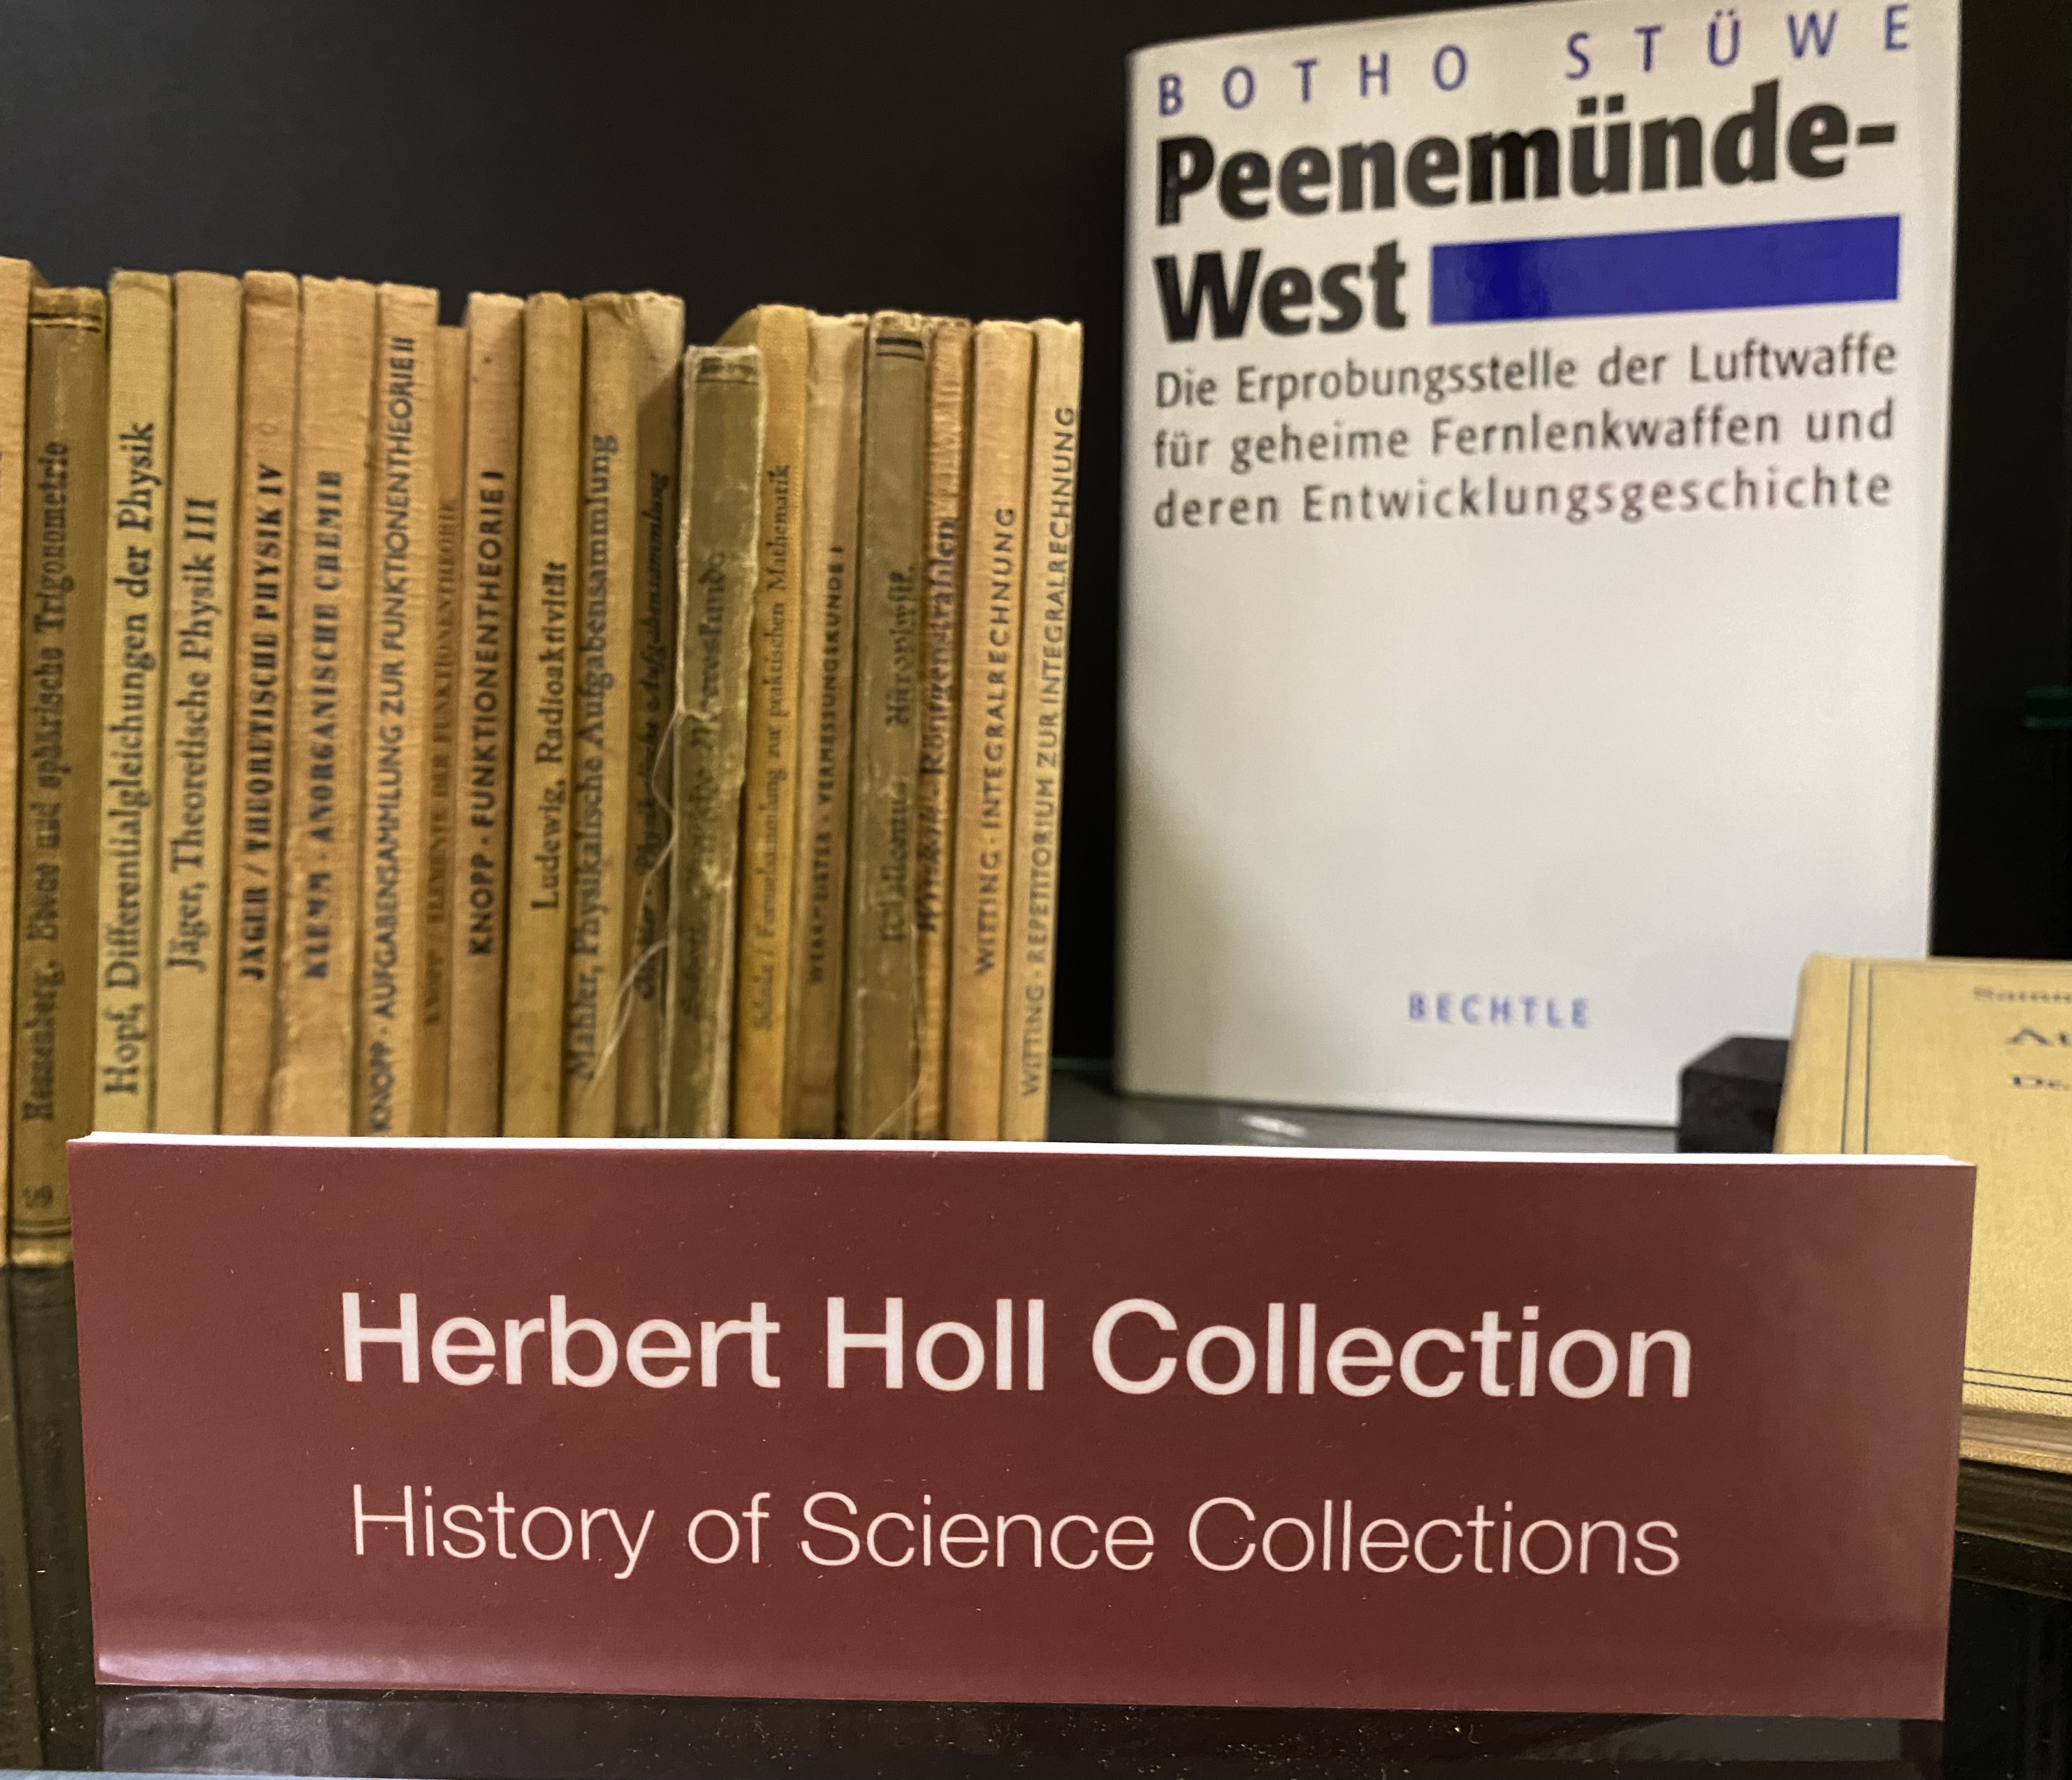 Photo of shelf with small books with spines visible and large book with cover visible; sign says "Herbert Holl Collection"